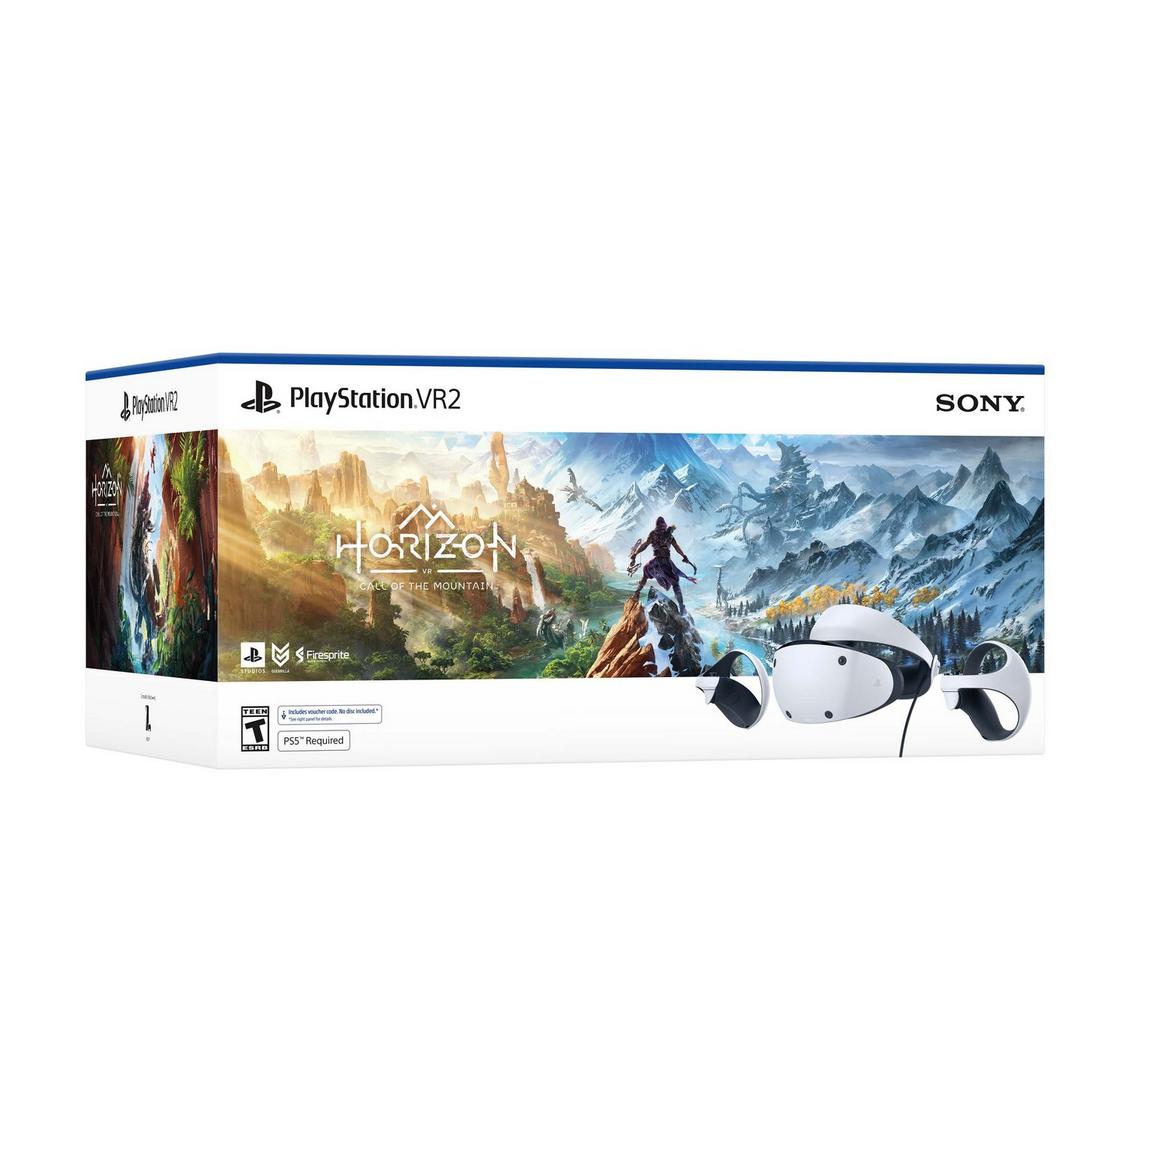 Sony Playstation VR2 Horizon Bundle:Available by Order Only